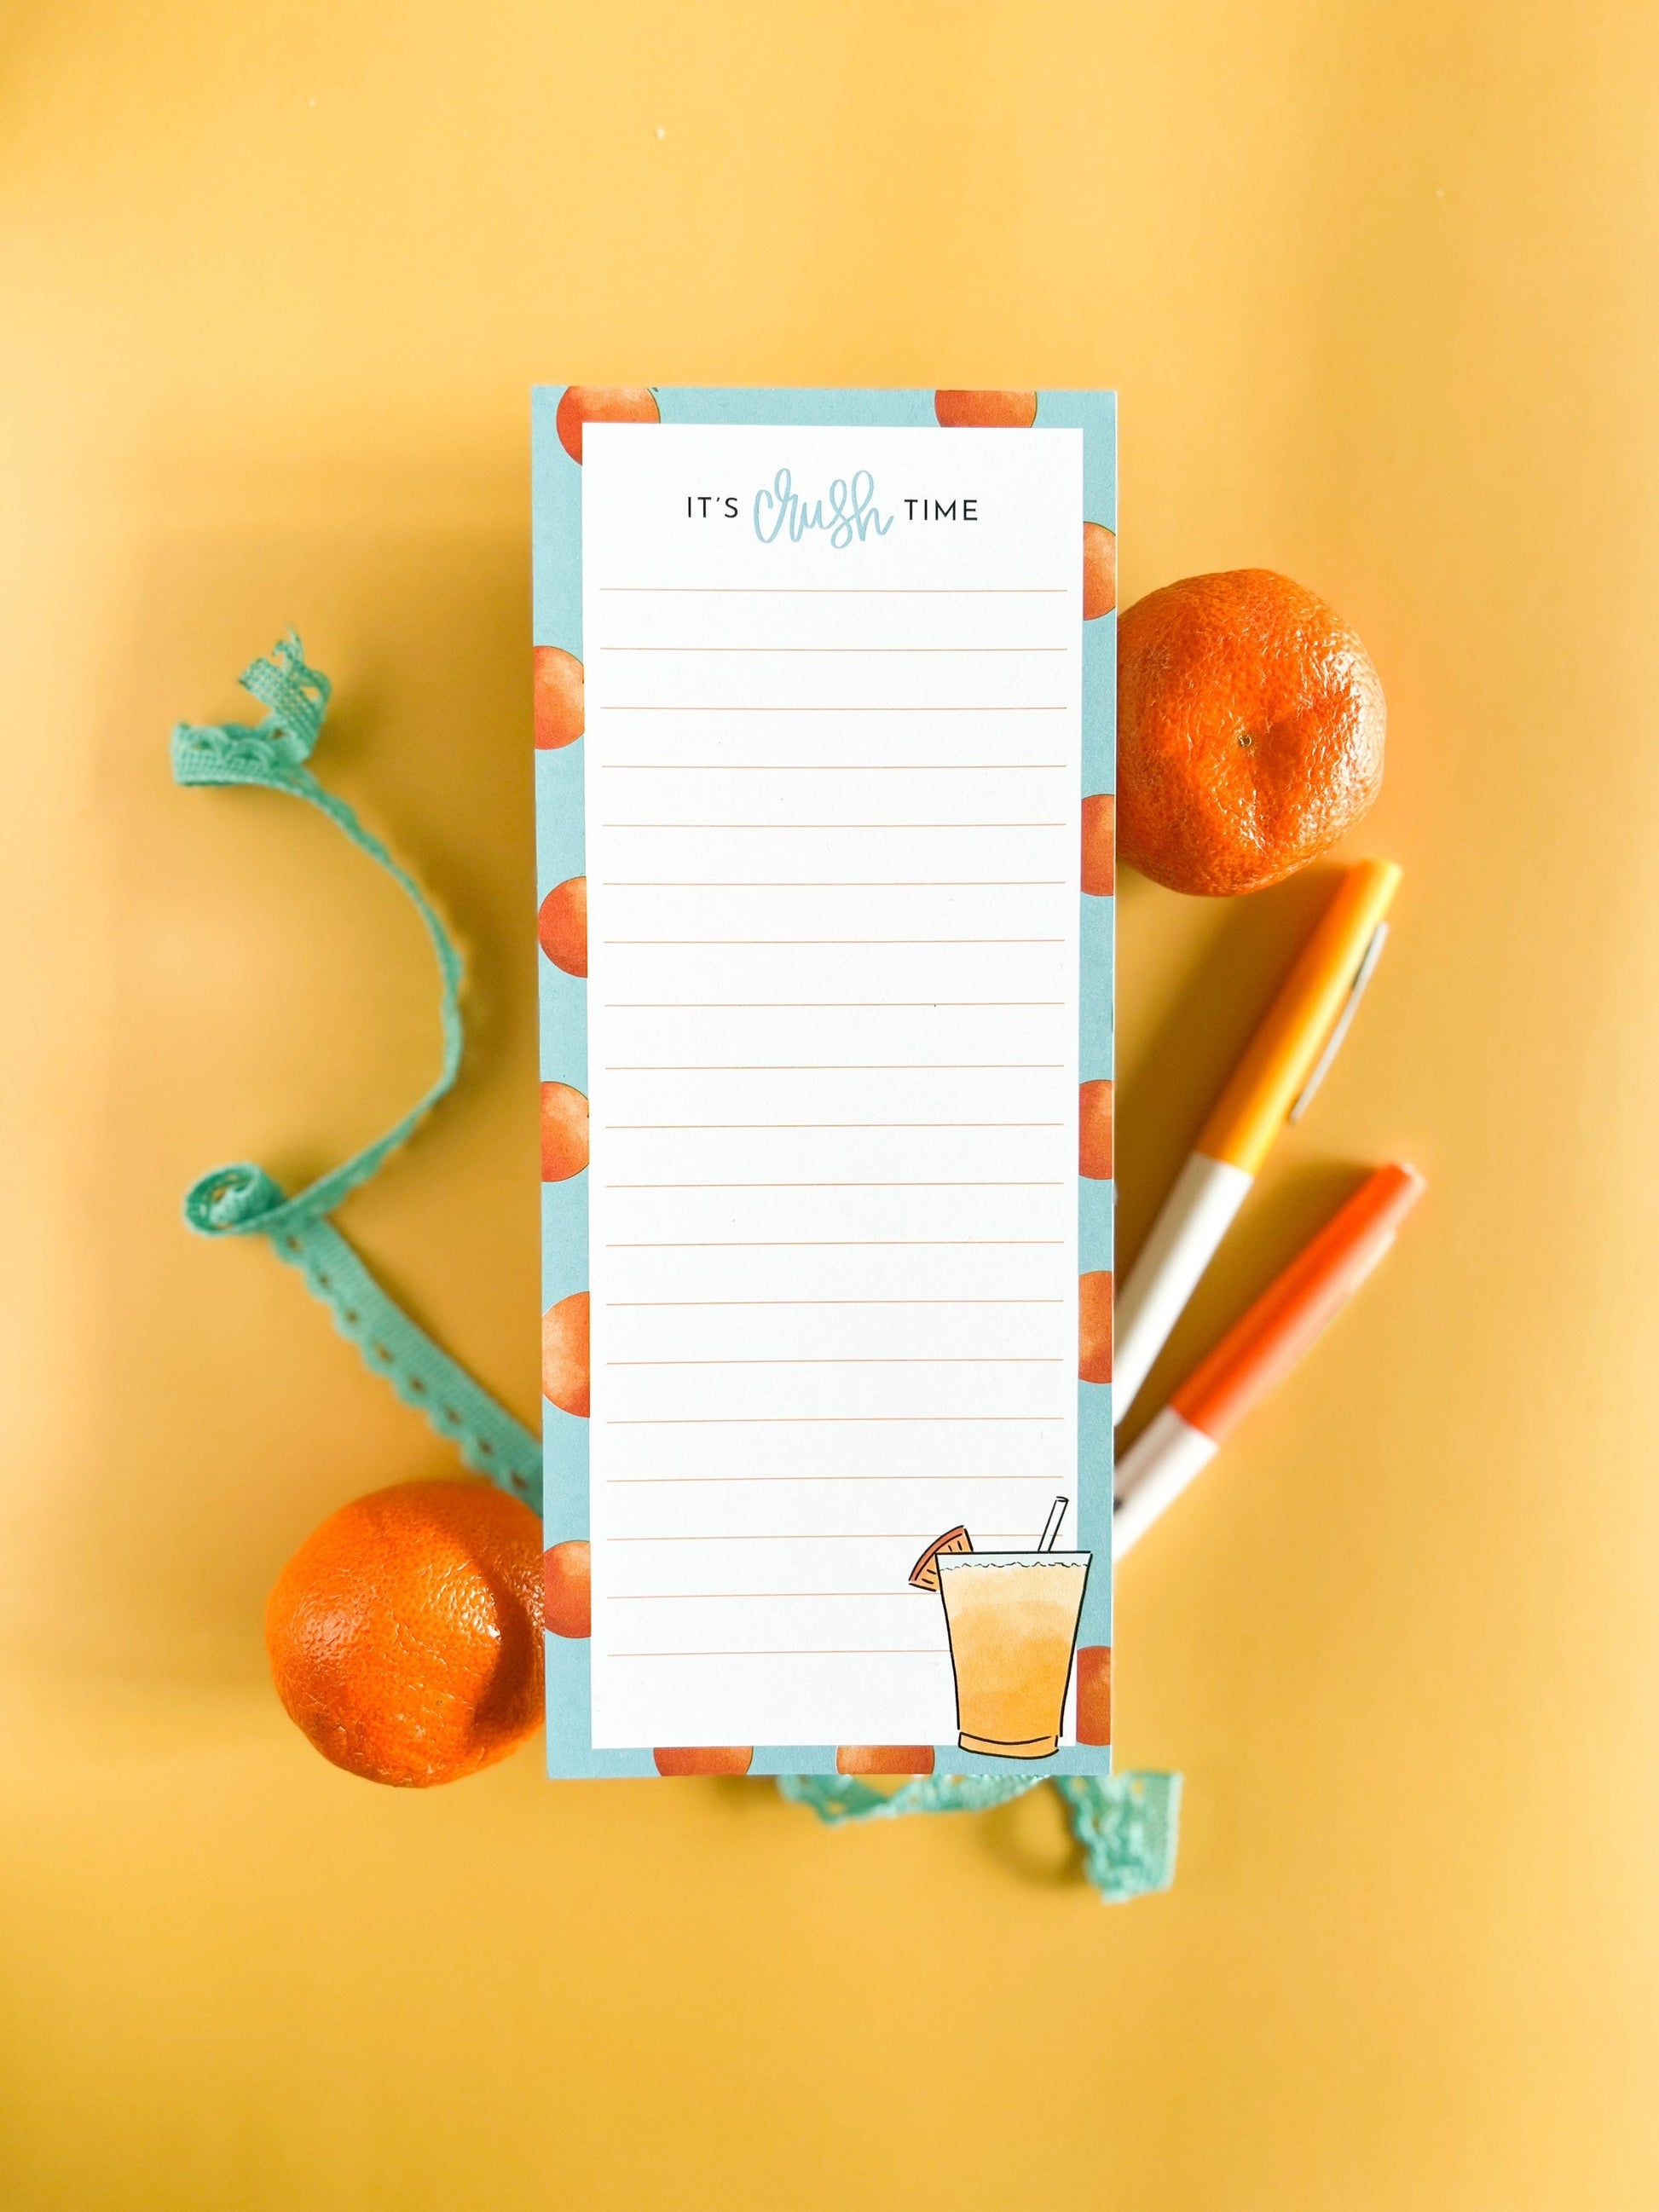 It’s crush time -orange crush notepad - to do list - cute drink notepad